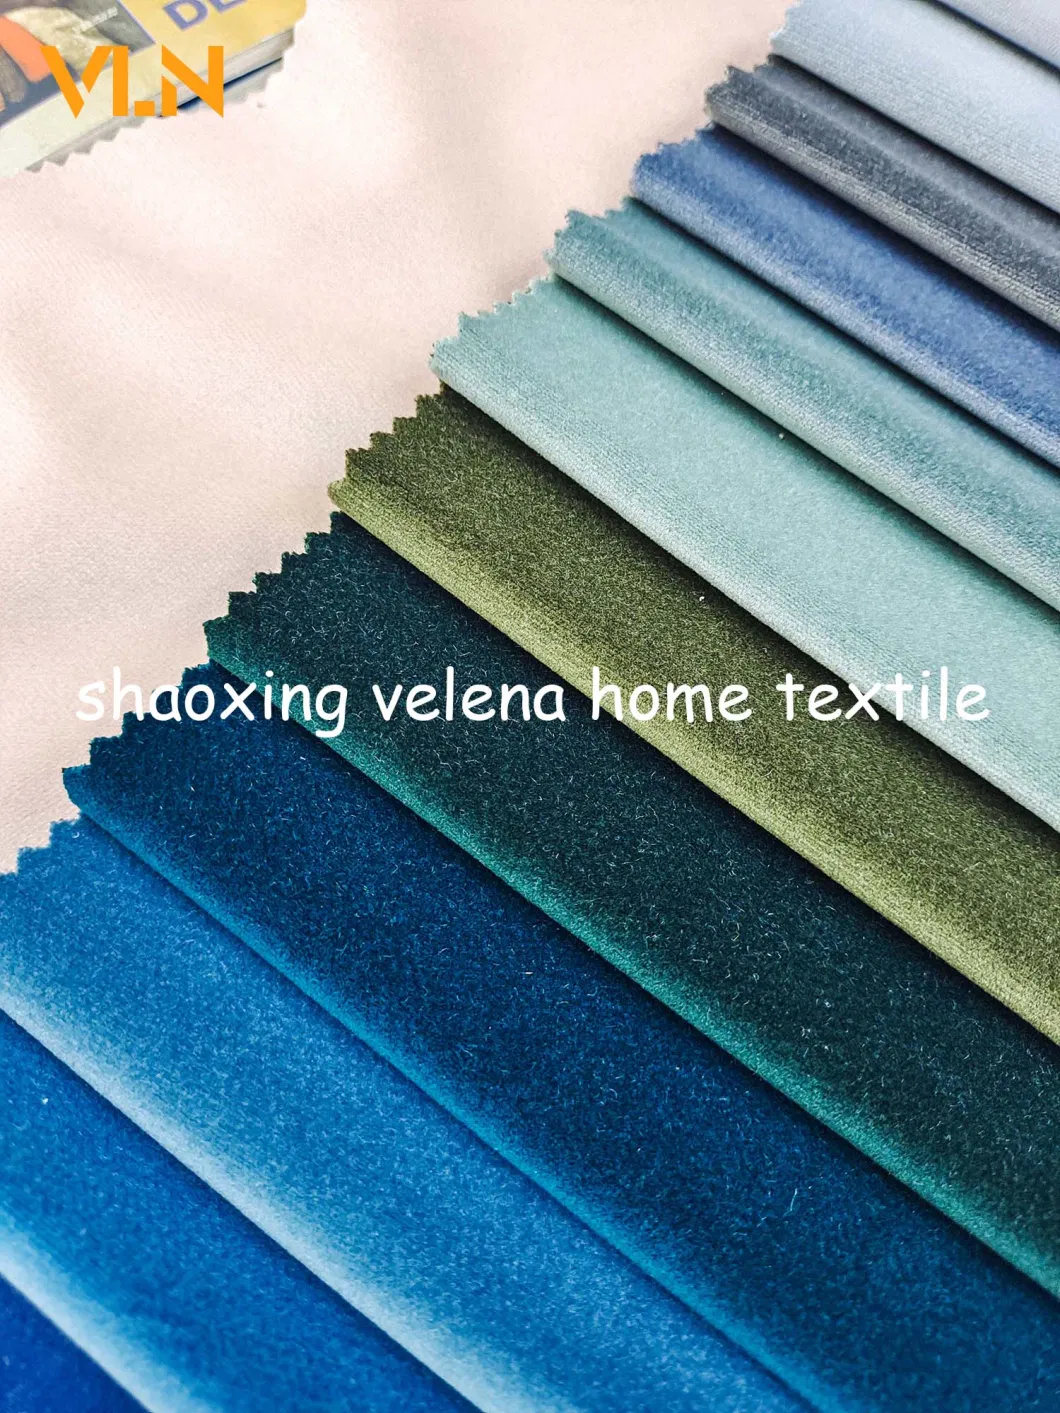 New Arrival 100%Polyester Blackout Holland Velvet Plain Dyed No Hair Direction Home Textile Furniture Upholstery Sofa Curtain Fabric